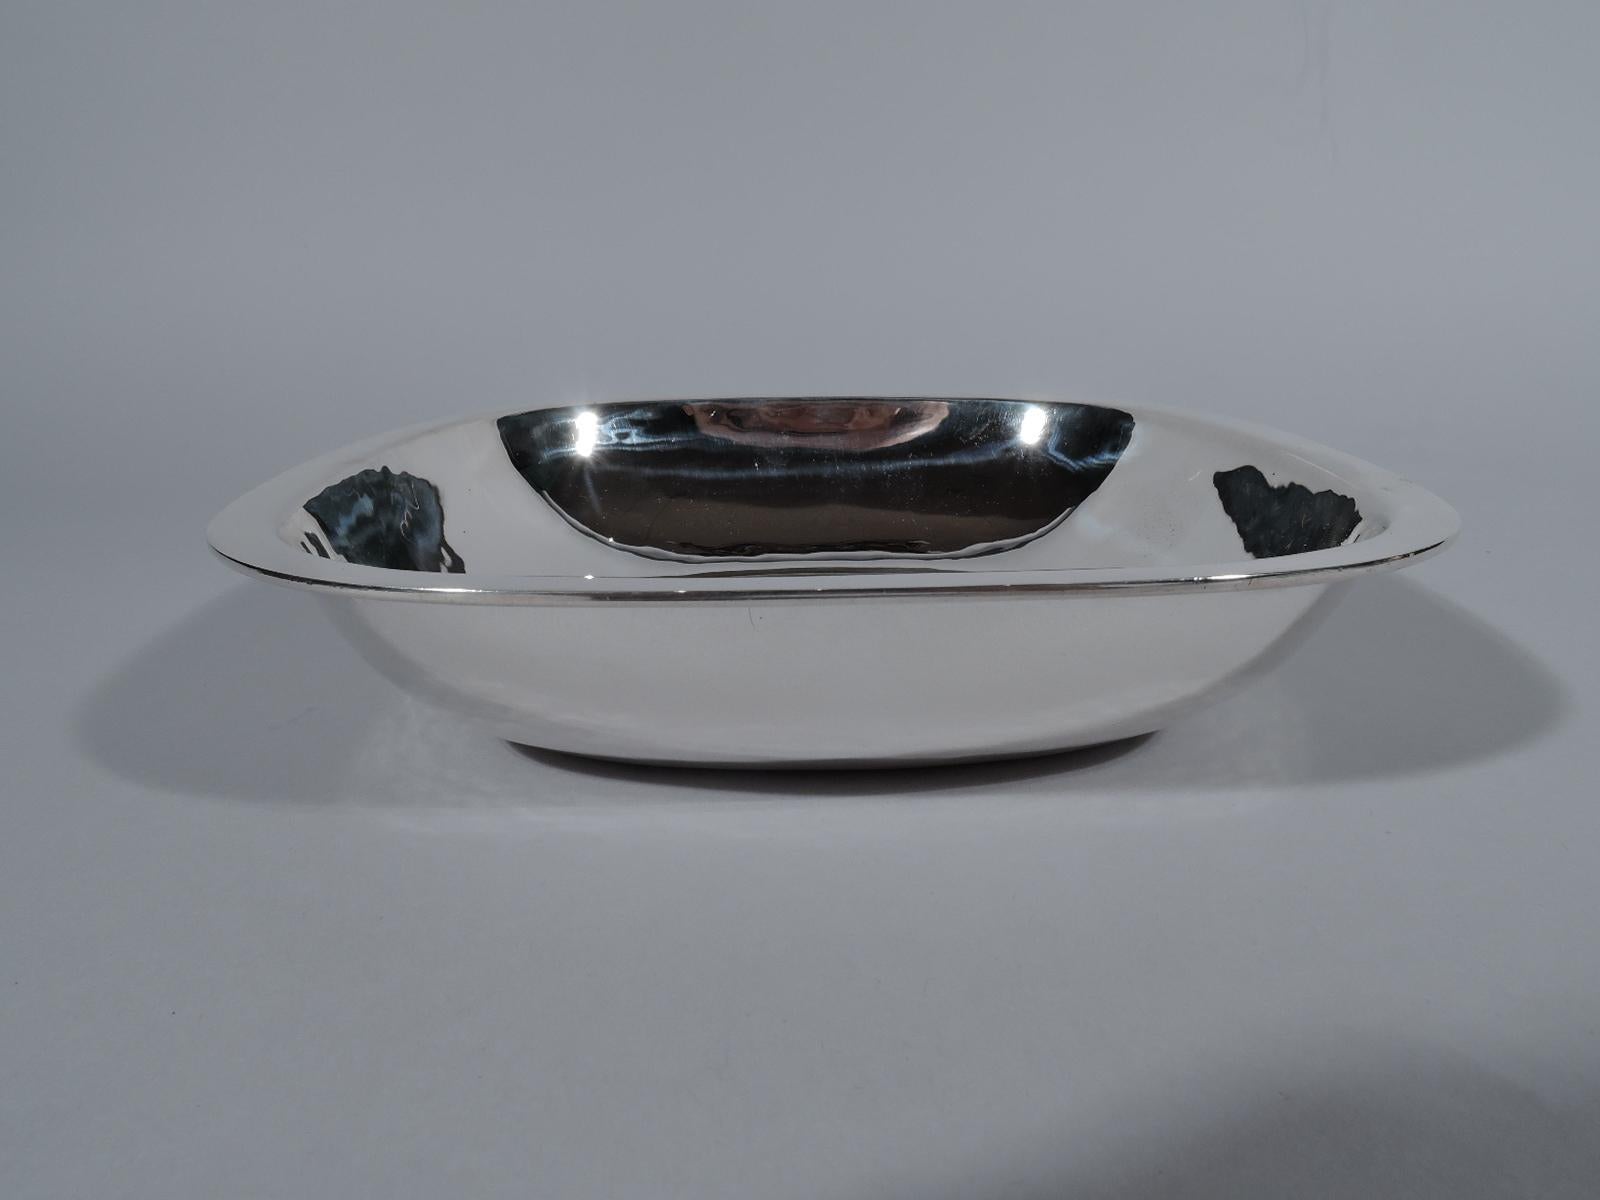 Modern sterling silver bowl. Handmade by Arthur Stone in Gardner, Mass. Squarish with 4 fluidly curved and tapering sides, and flat rim. Fully marked including maker’s stamp and craftsman’s initial C for either David Carlson (fl. 1909-1919) or